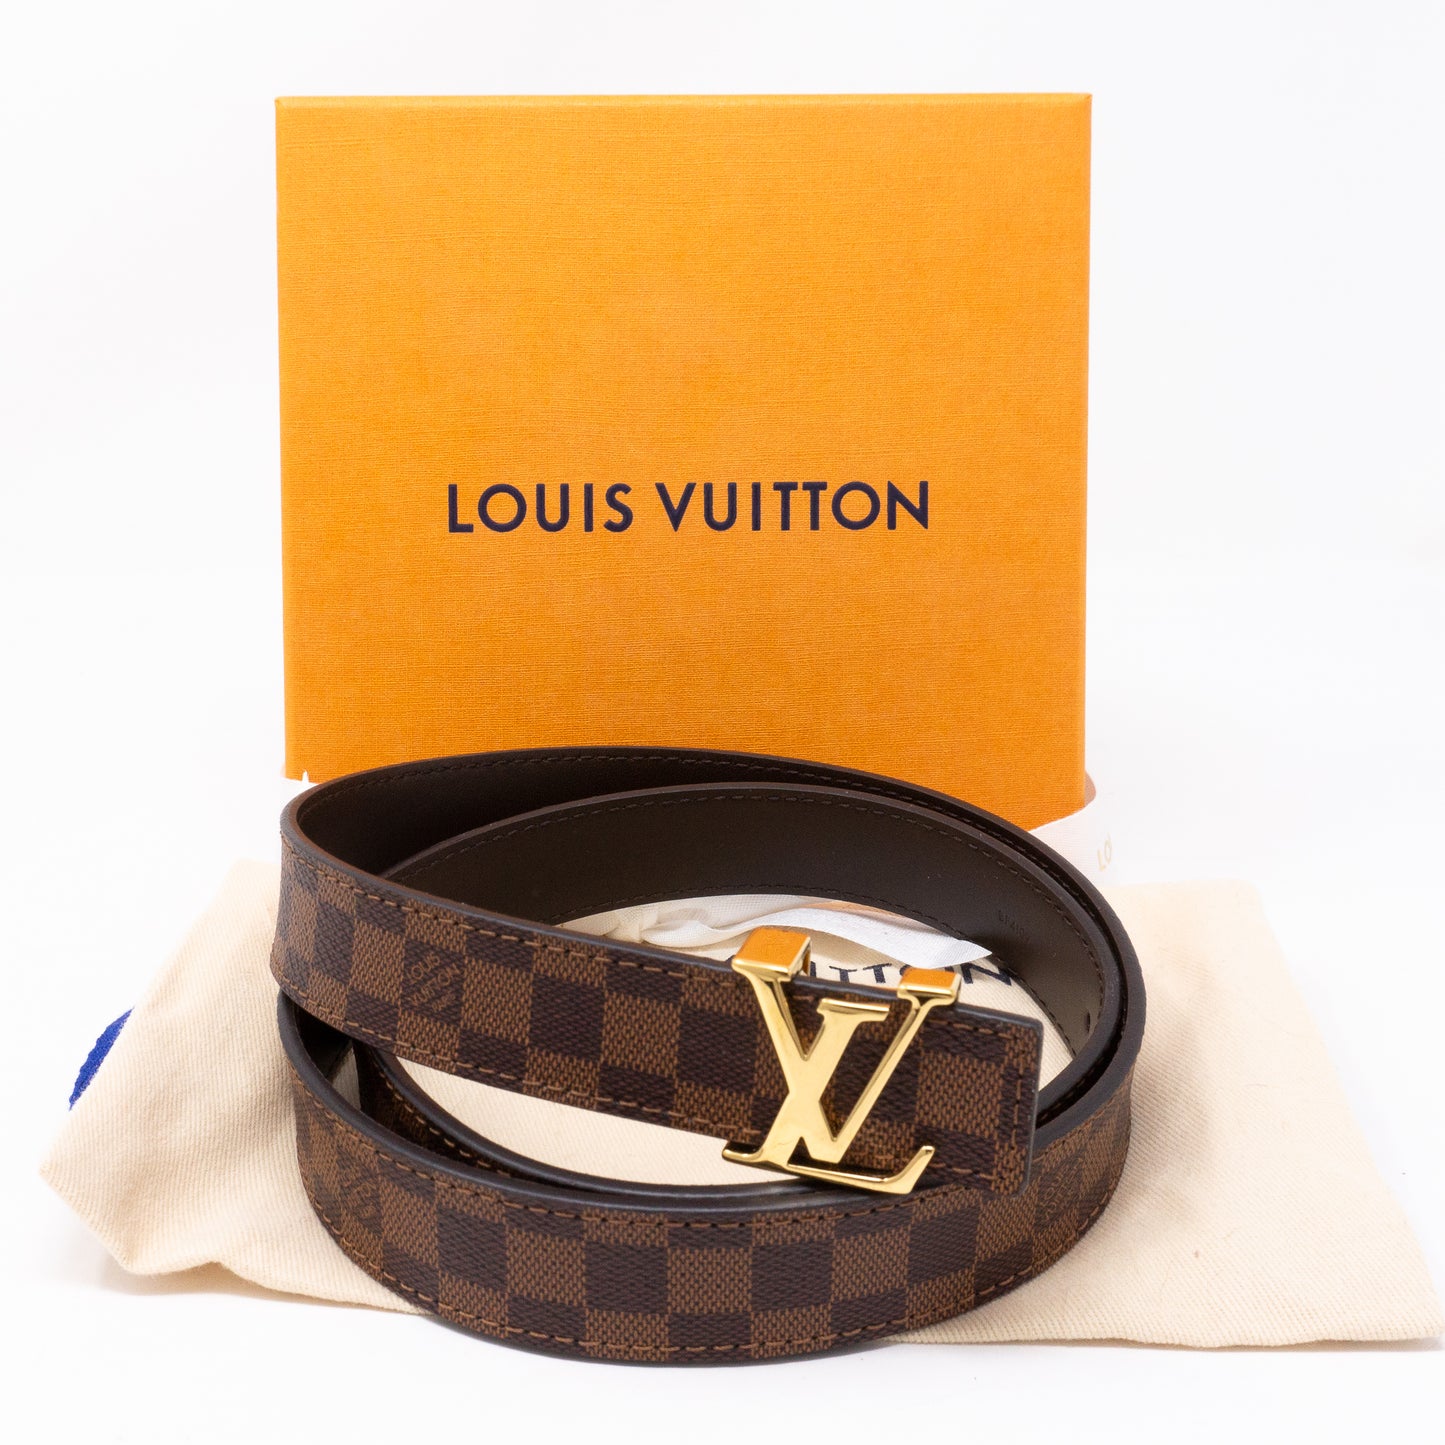 Initiales leather belt Louis Vuitton Brown size 80 cm in Leather